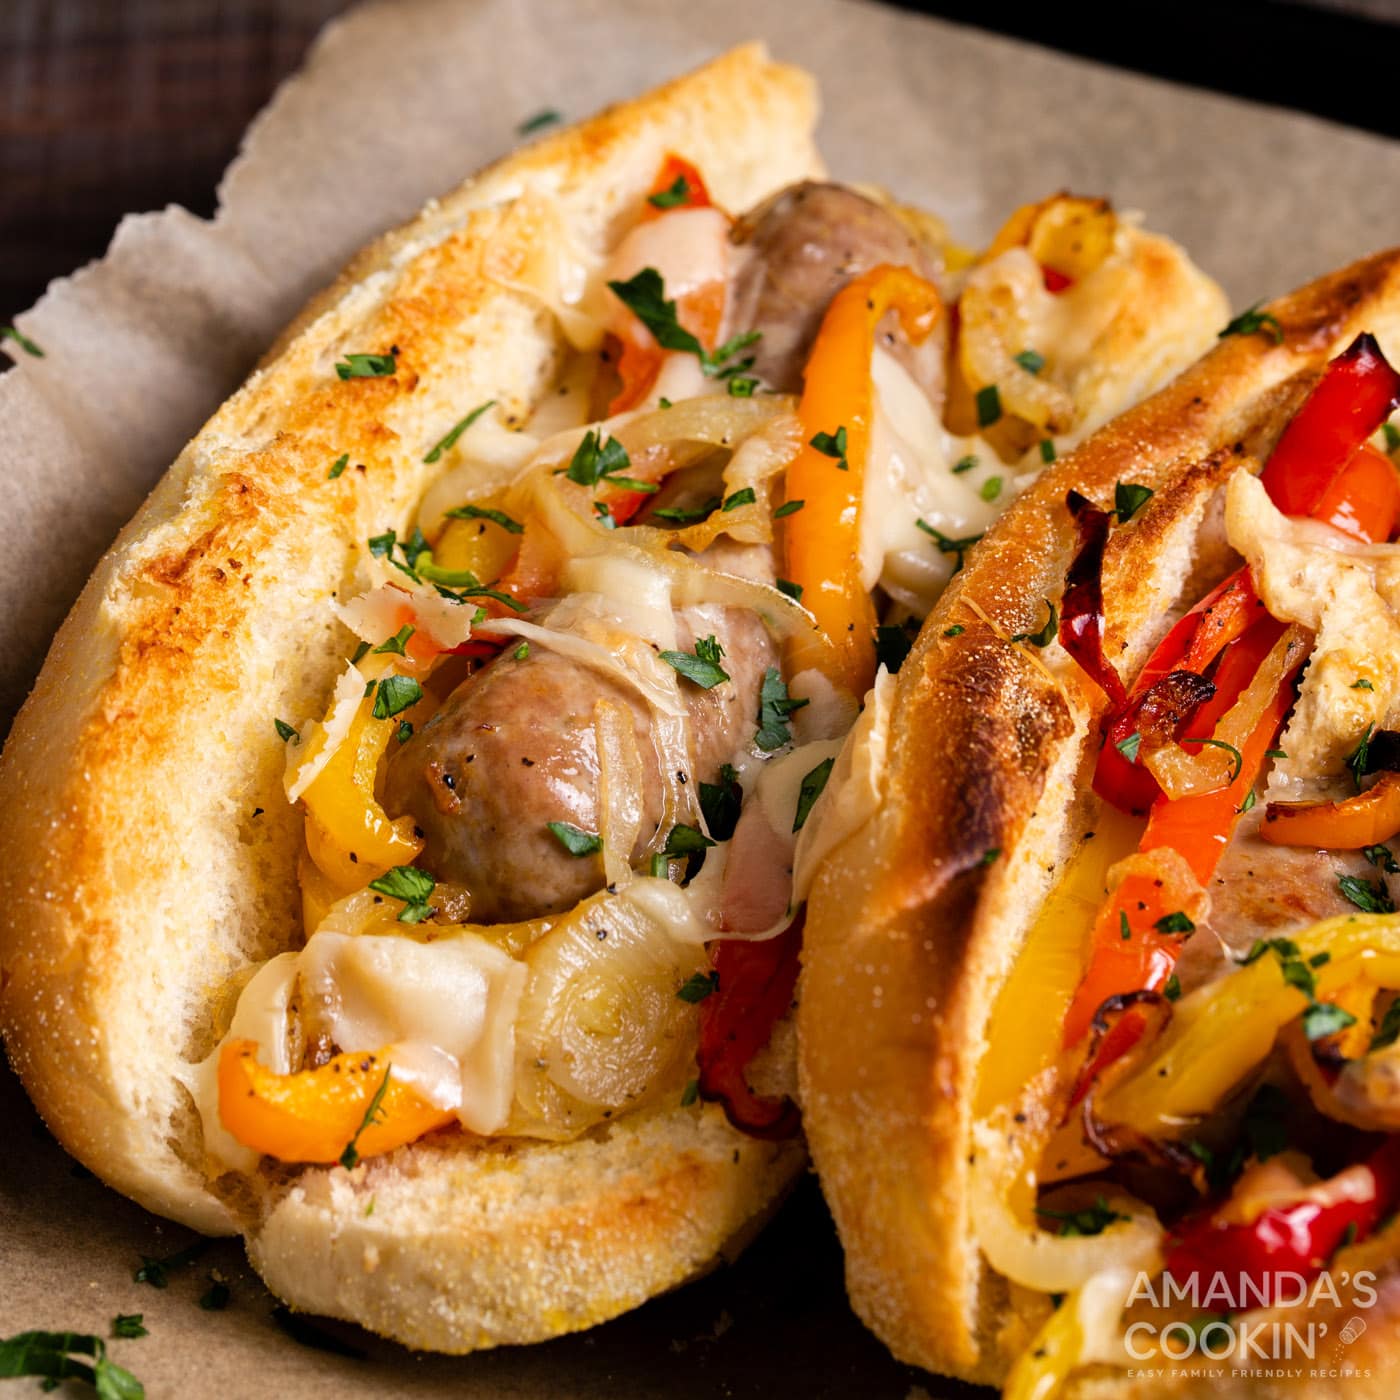 Air Fryer Italian Sausage With Peppers and Onions - jennieo site